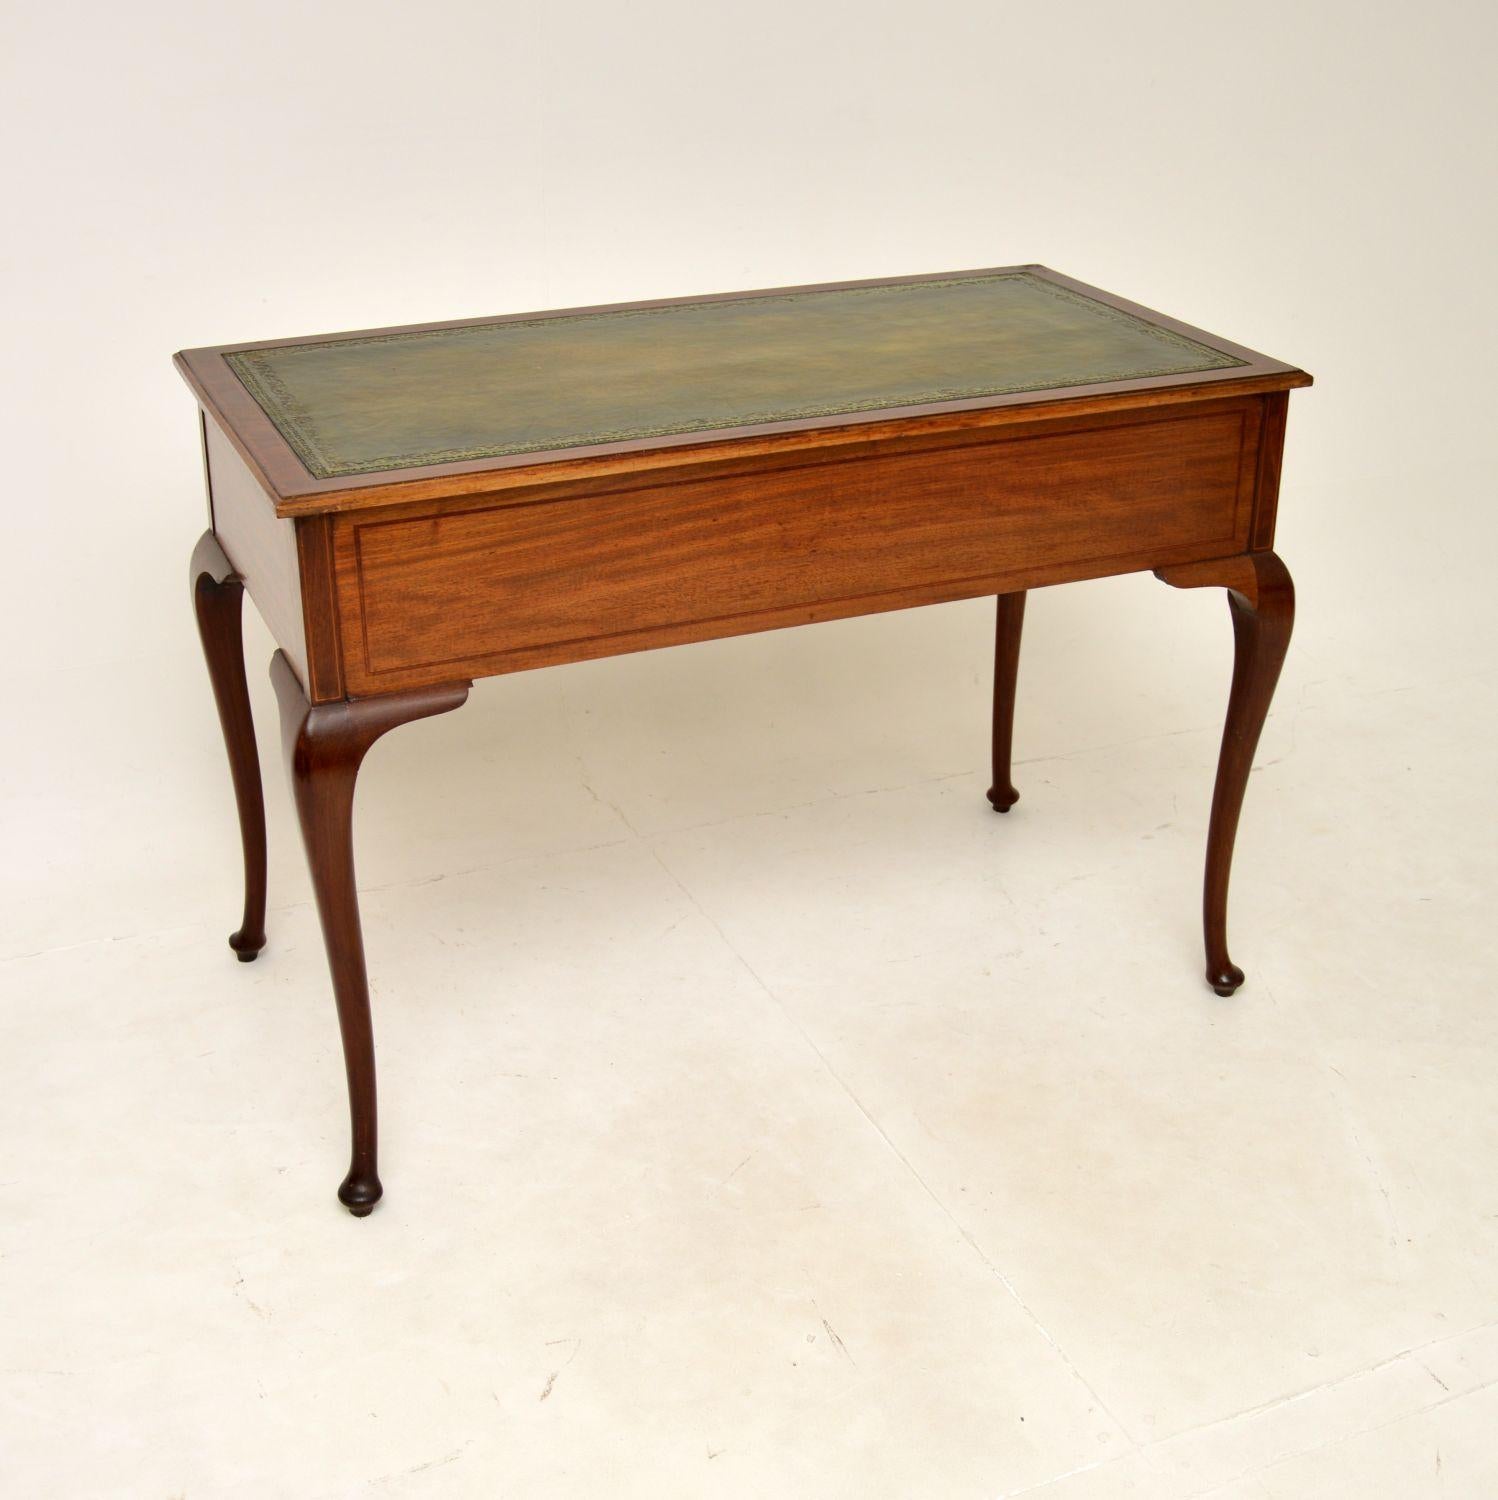 Antique Edwardian Inlaid Desk by Maple & Co In Good Condition For Sale In London, GB